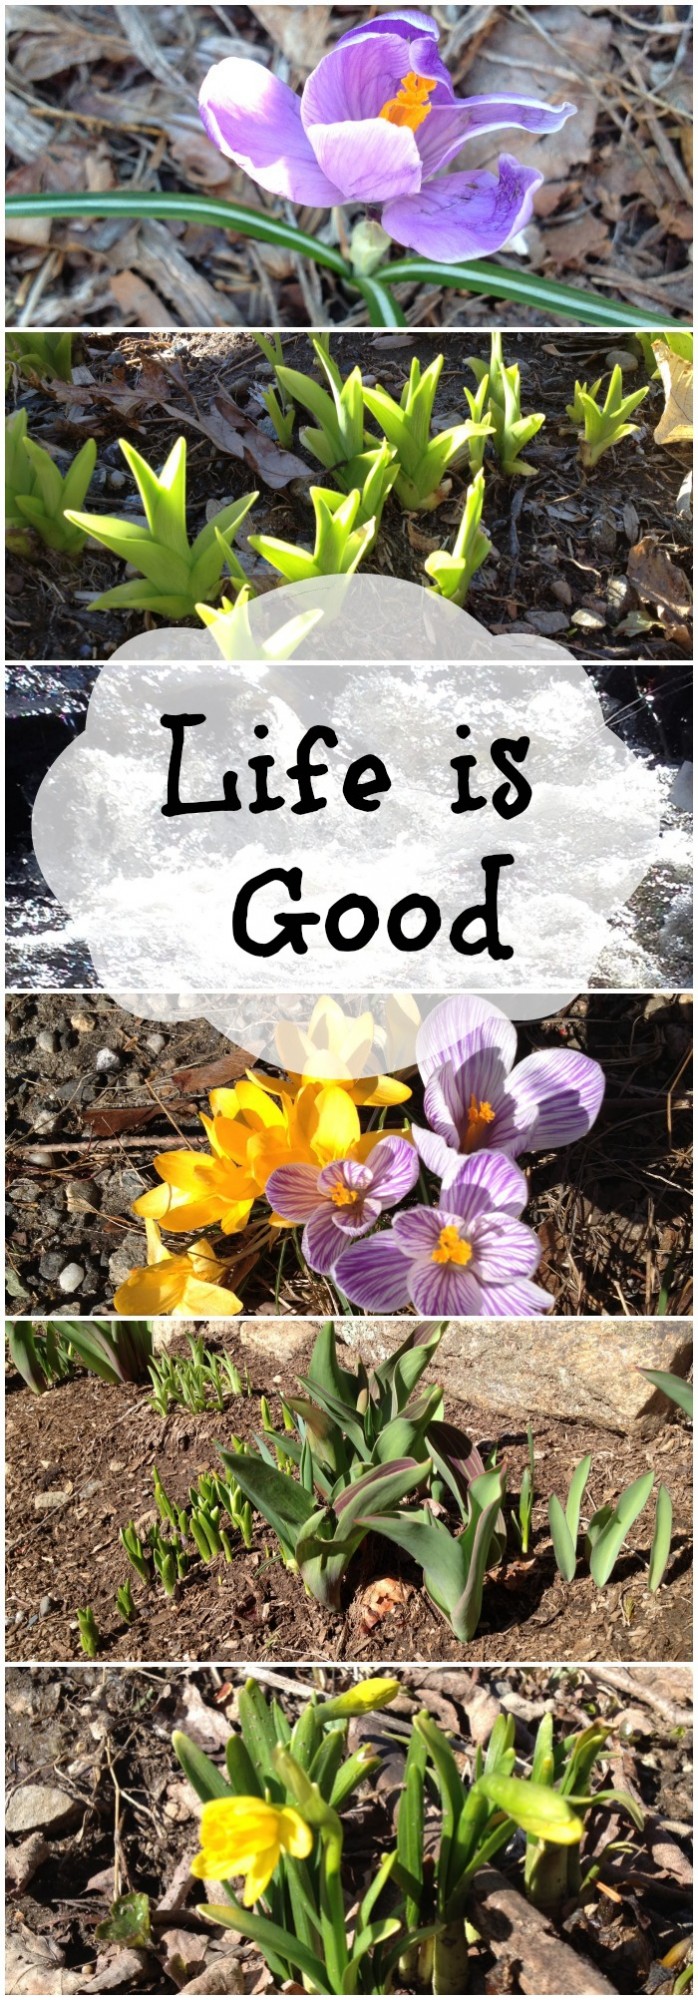 Life Is Good - Happy Spring!